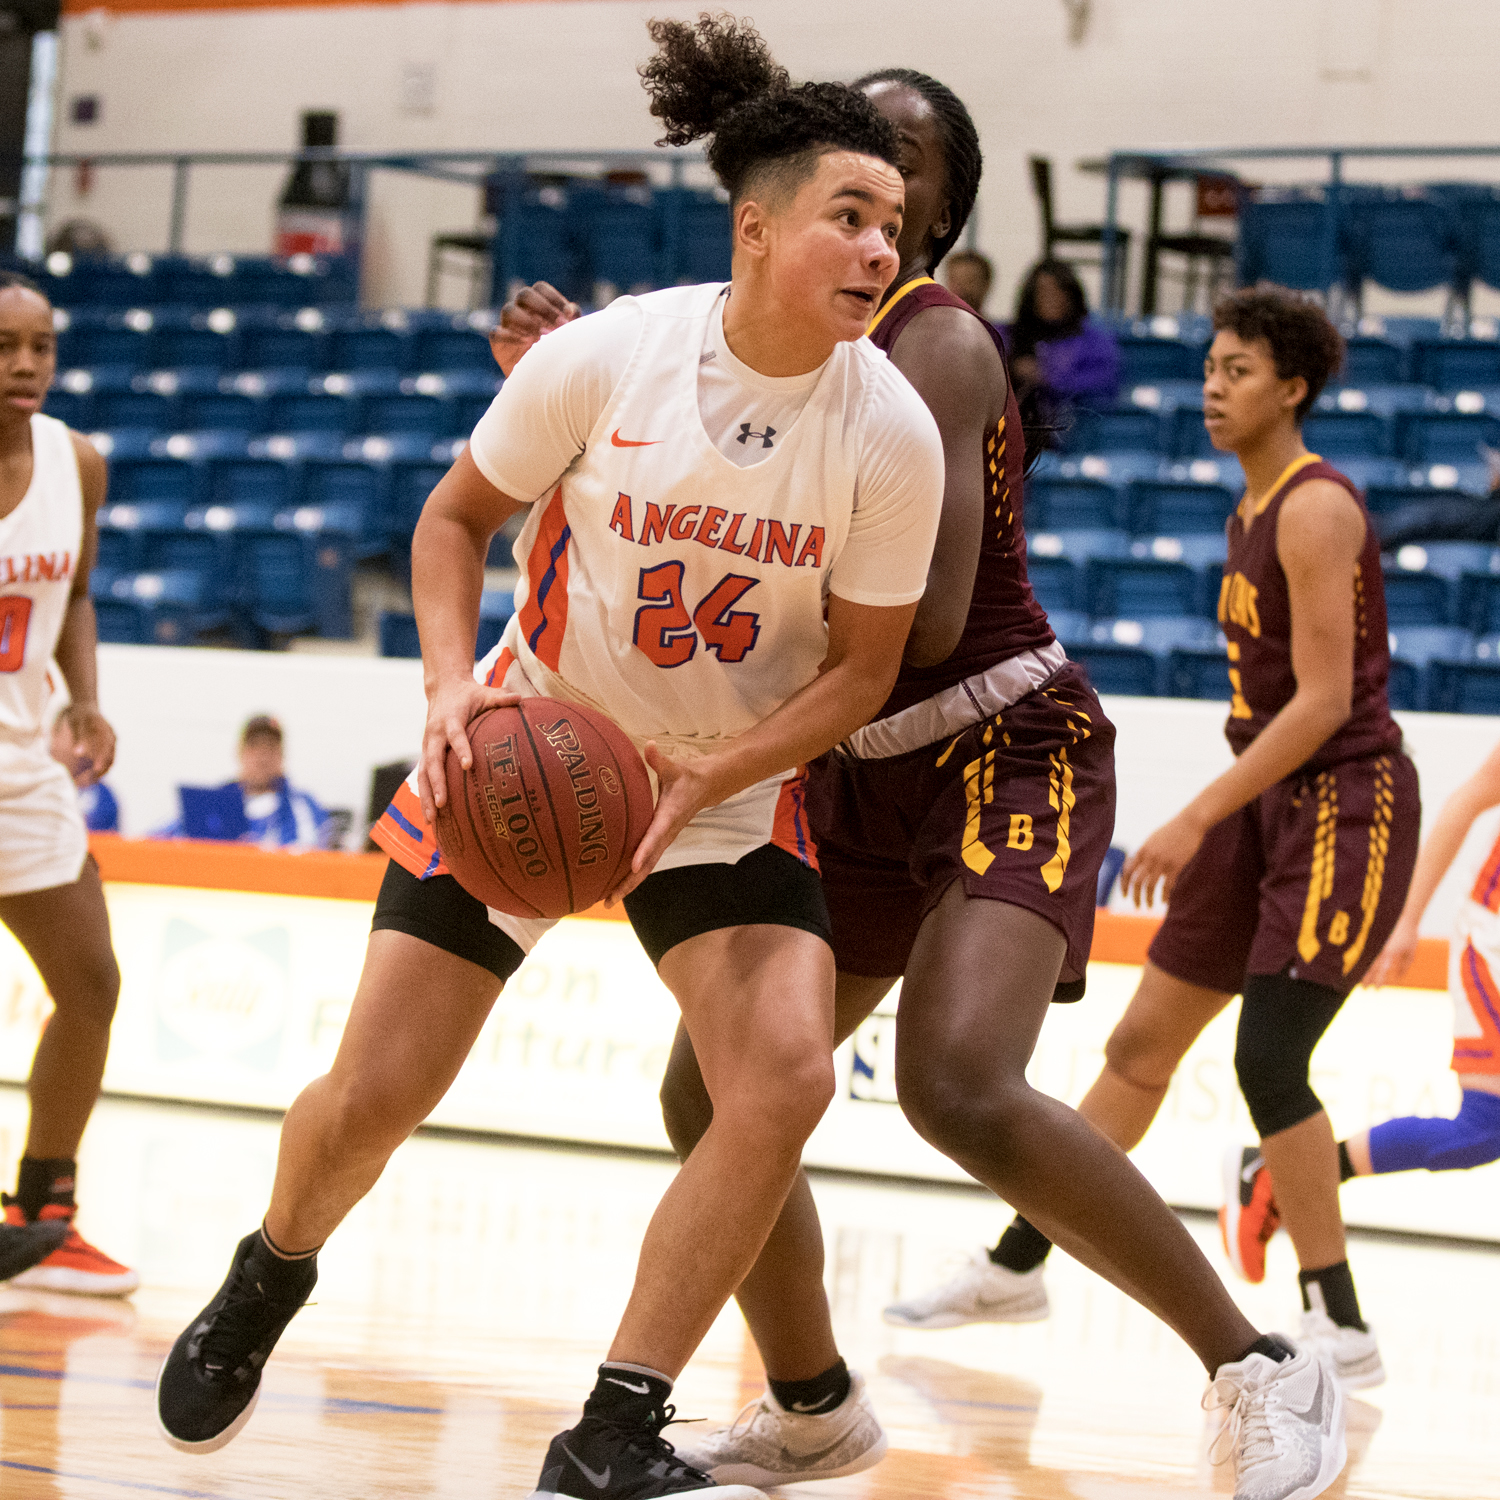 Lady Roadrunners Host Paris College on Saturday AC Tied for Third in Conference Standings